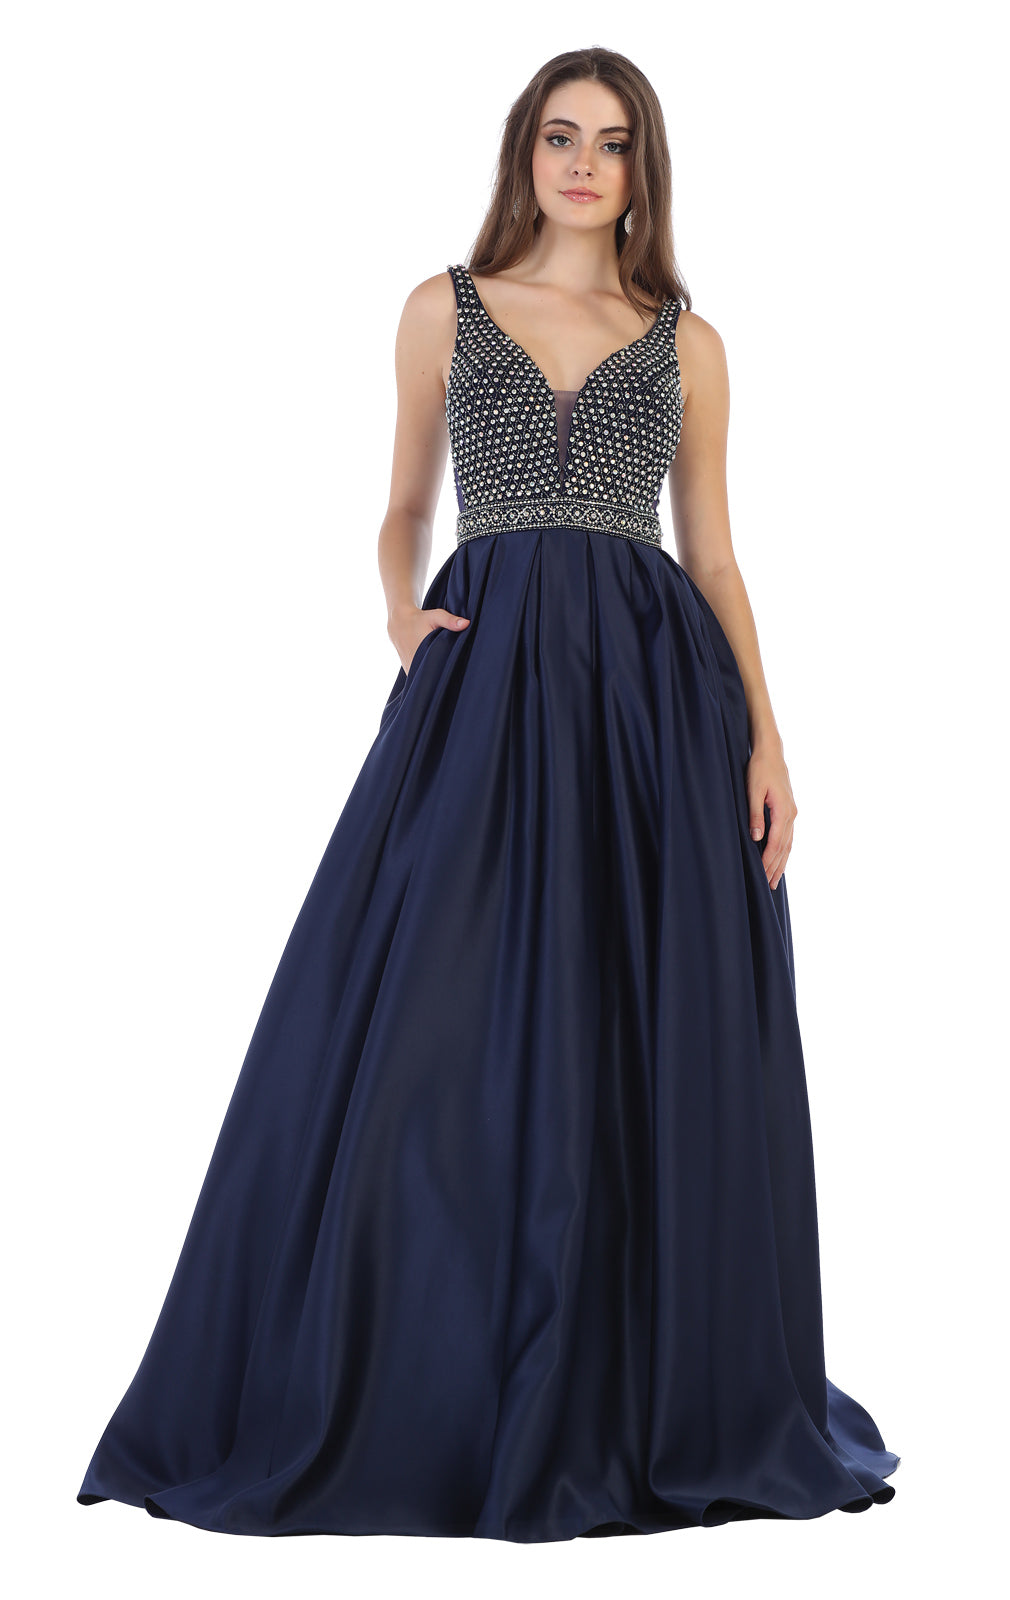 May Queen Prom RQ7680